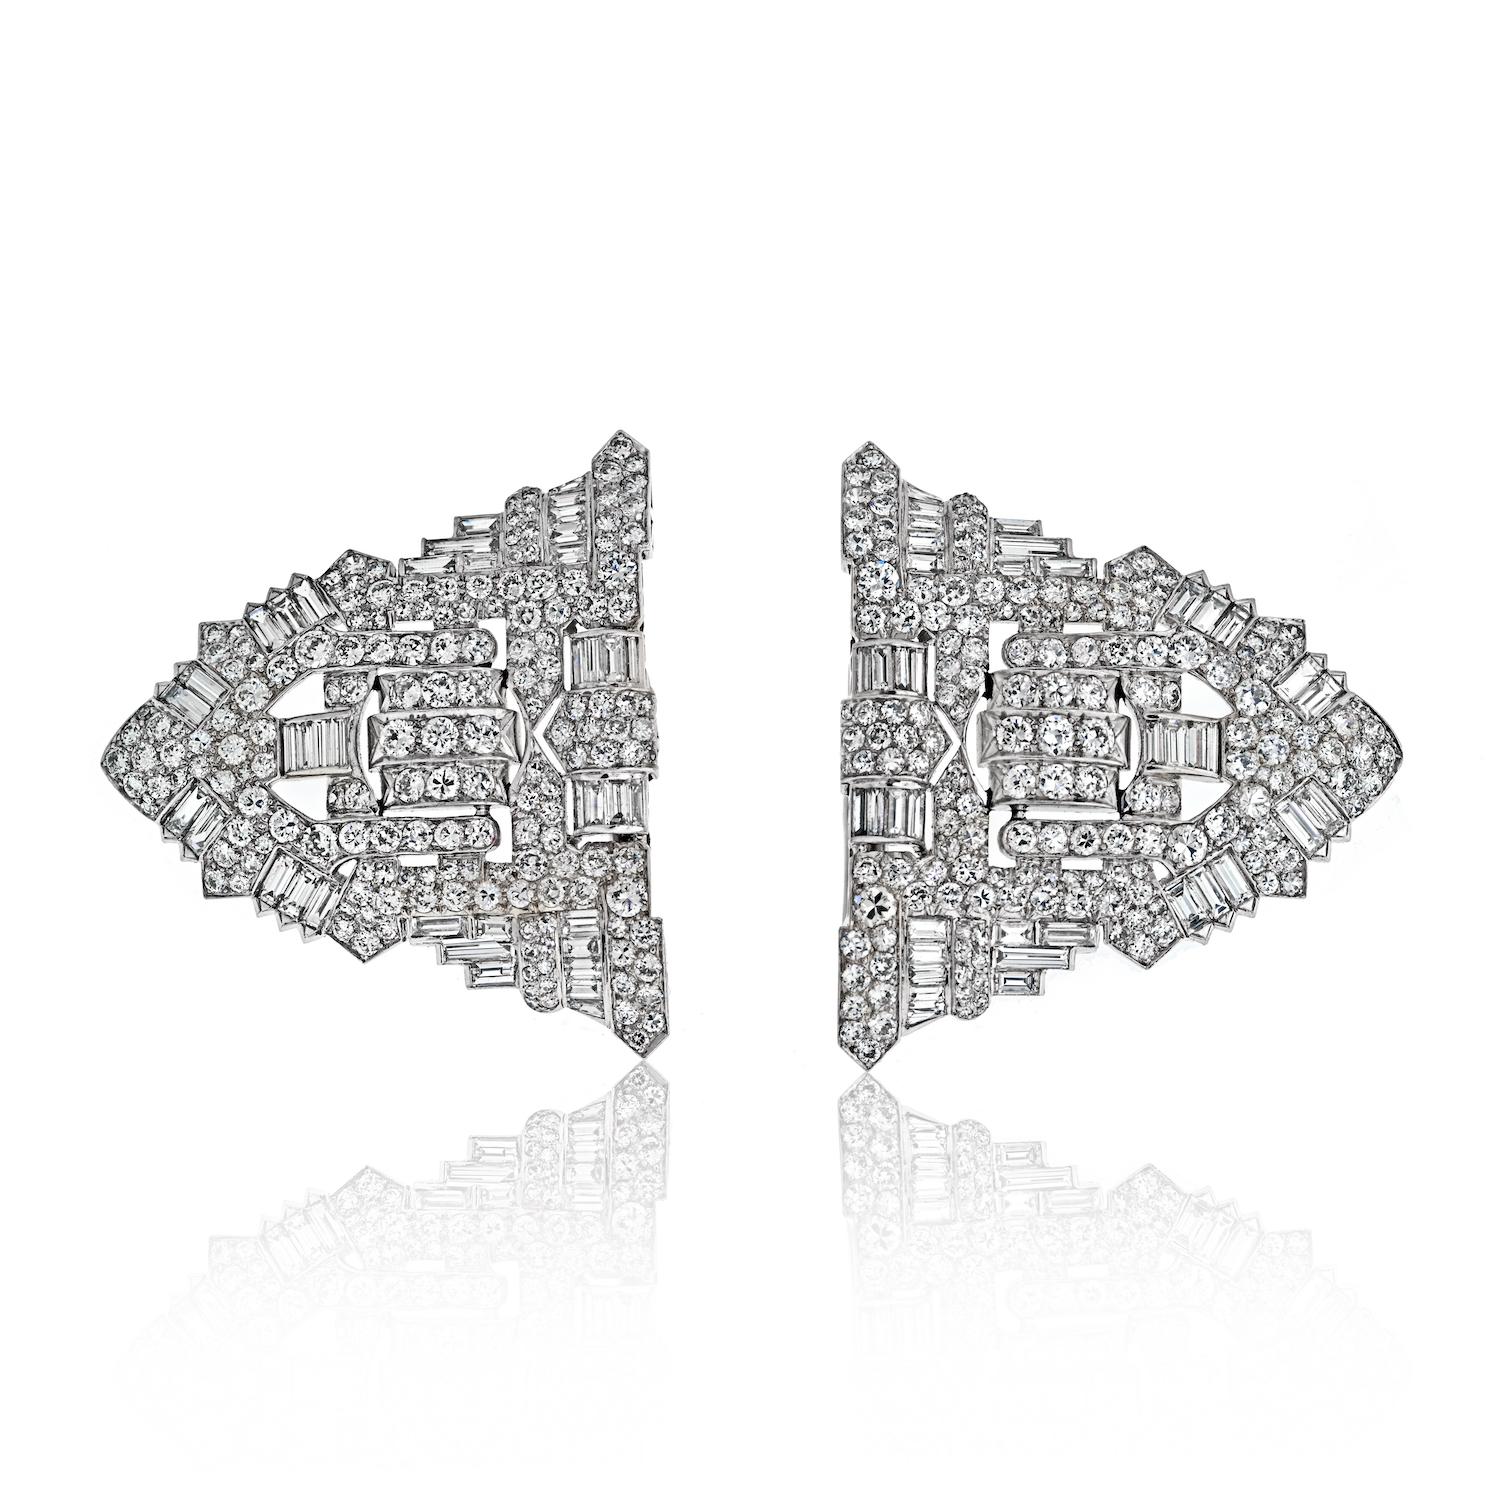 A true masterpiece of the Art Deco era – a magnificent Platinum Diamond Double Clip Brooch, a timeless treasure of geometric elegance and lavish sparkle.

Each of the double clips, designed in the shape of a shield, stands as a testament to the